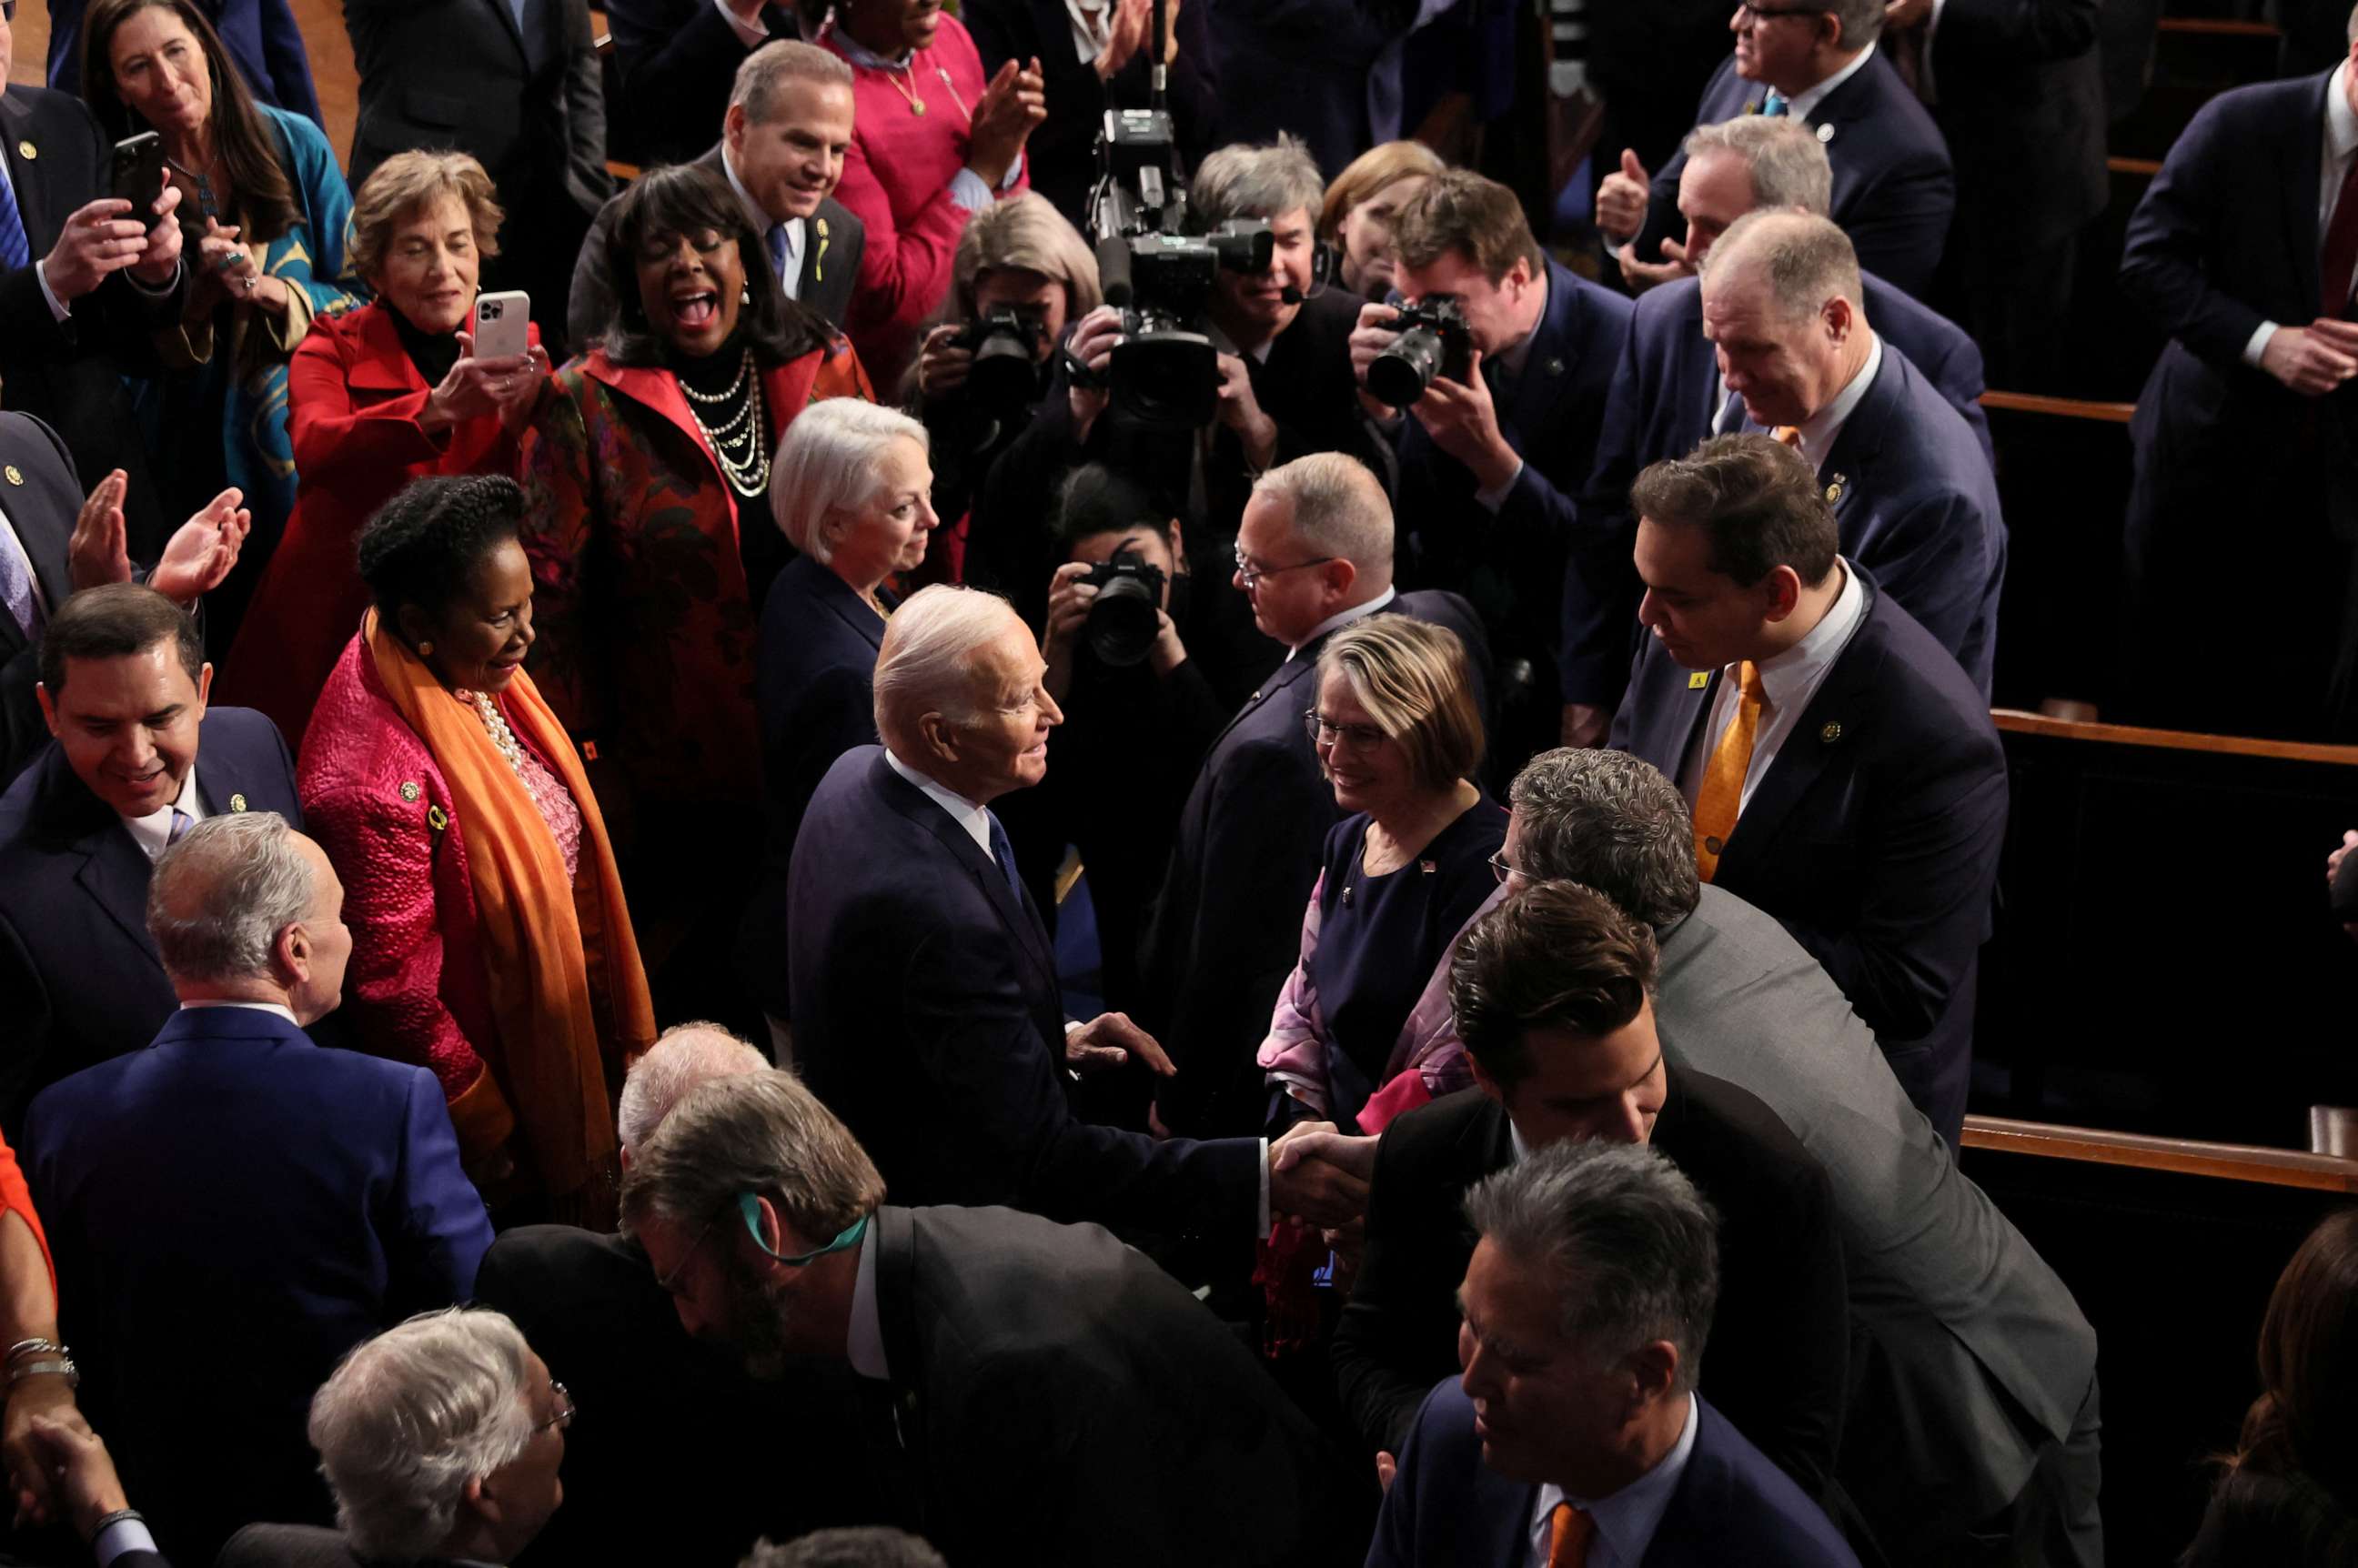 PHOTO: President Joe Biden greets members of Congress while Rep. George Santos watches as he arrives to deliver his State of the Union address in Washington, Feb. 7, 2023.